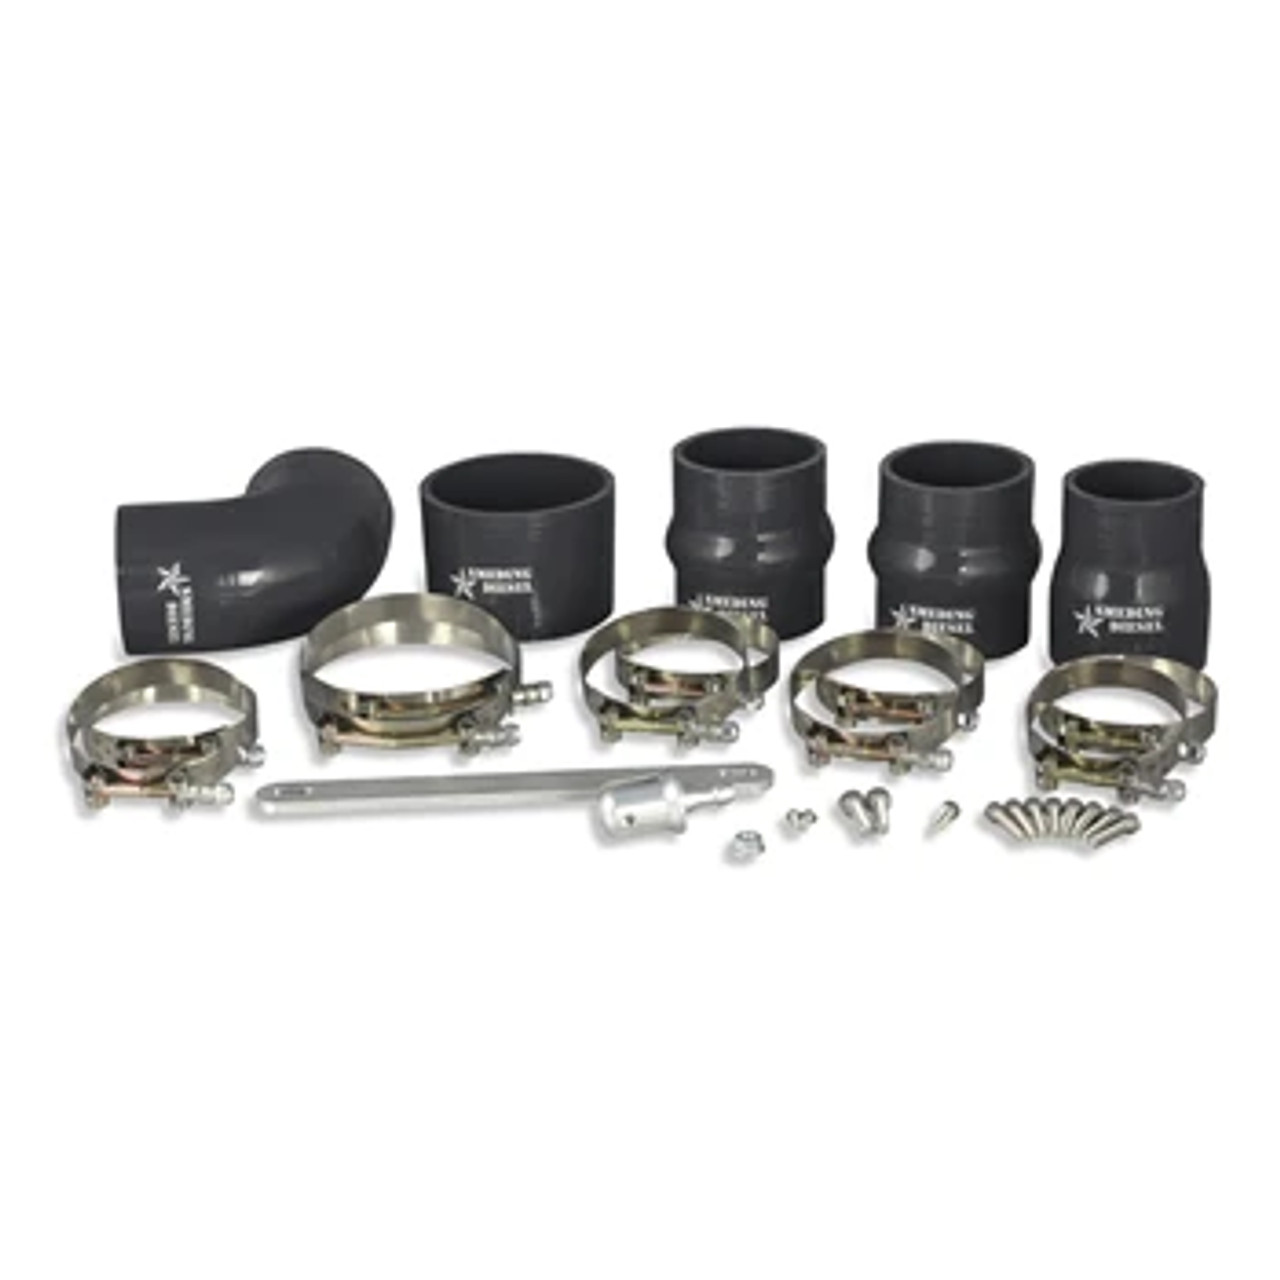 Smeding Diesel Complete Intercooler Pipe Kit For 2015 to 2016 Ford 6.7L Powerstroke (SD_67_1516PK) Fitting View